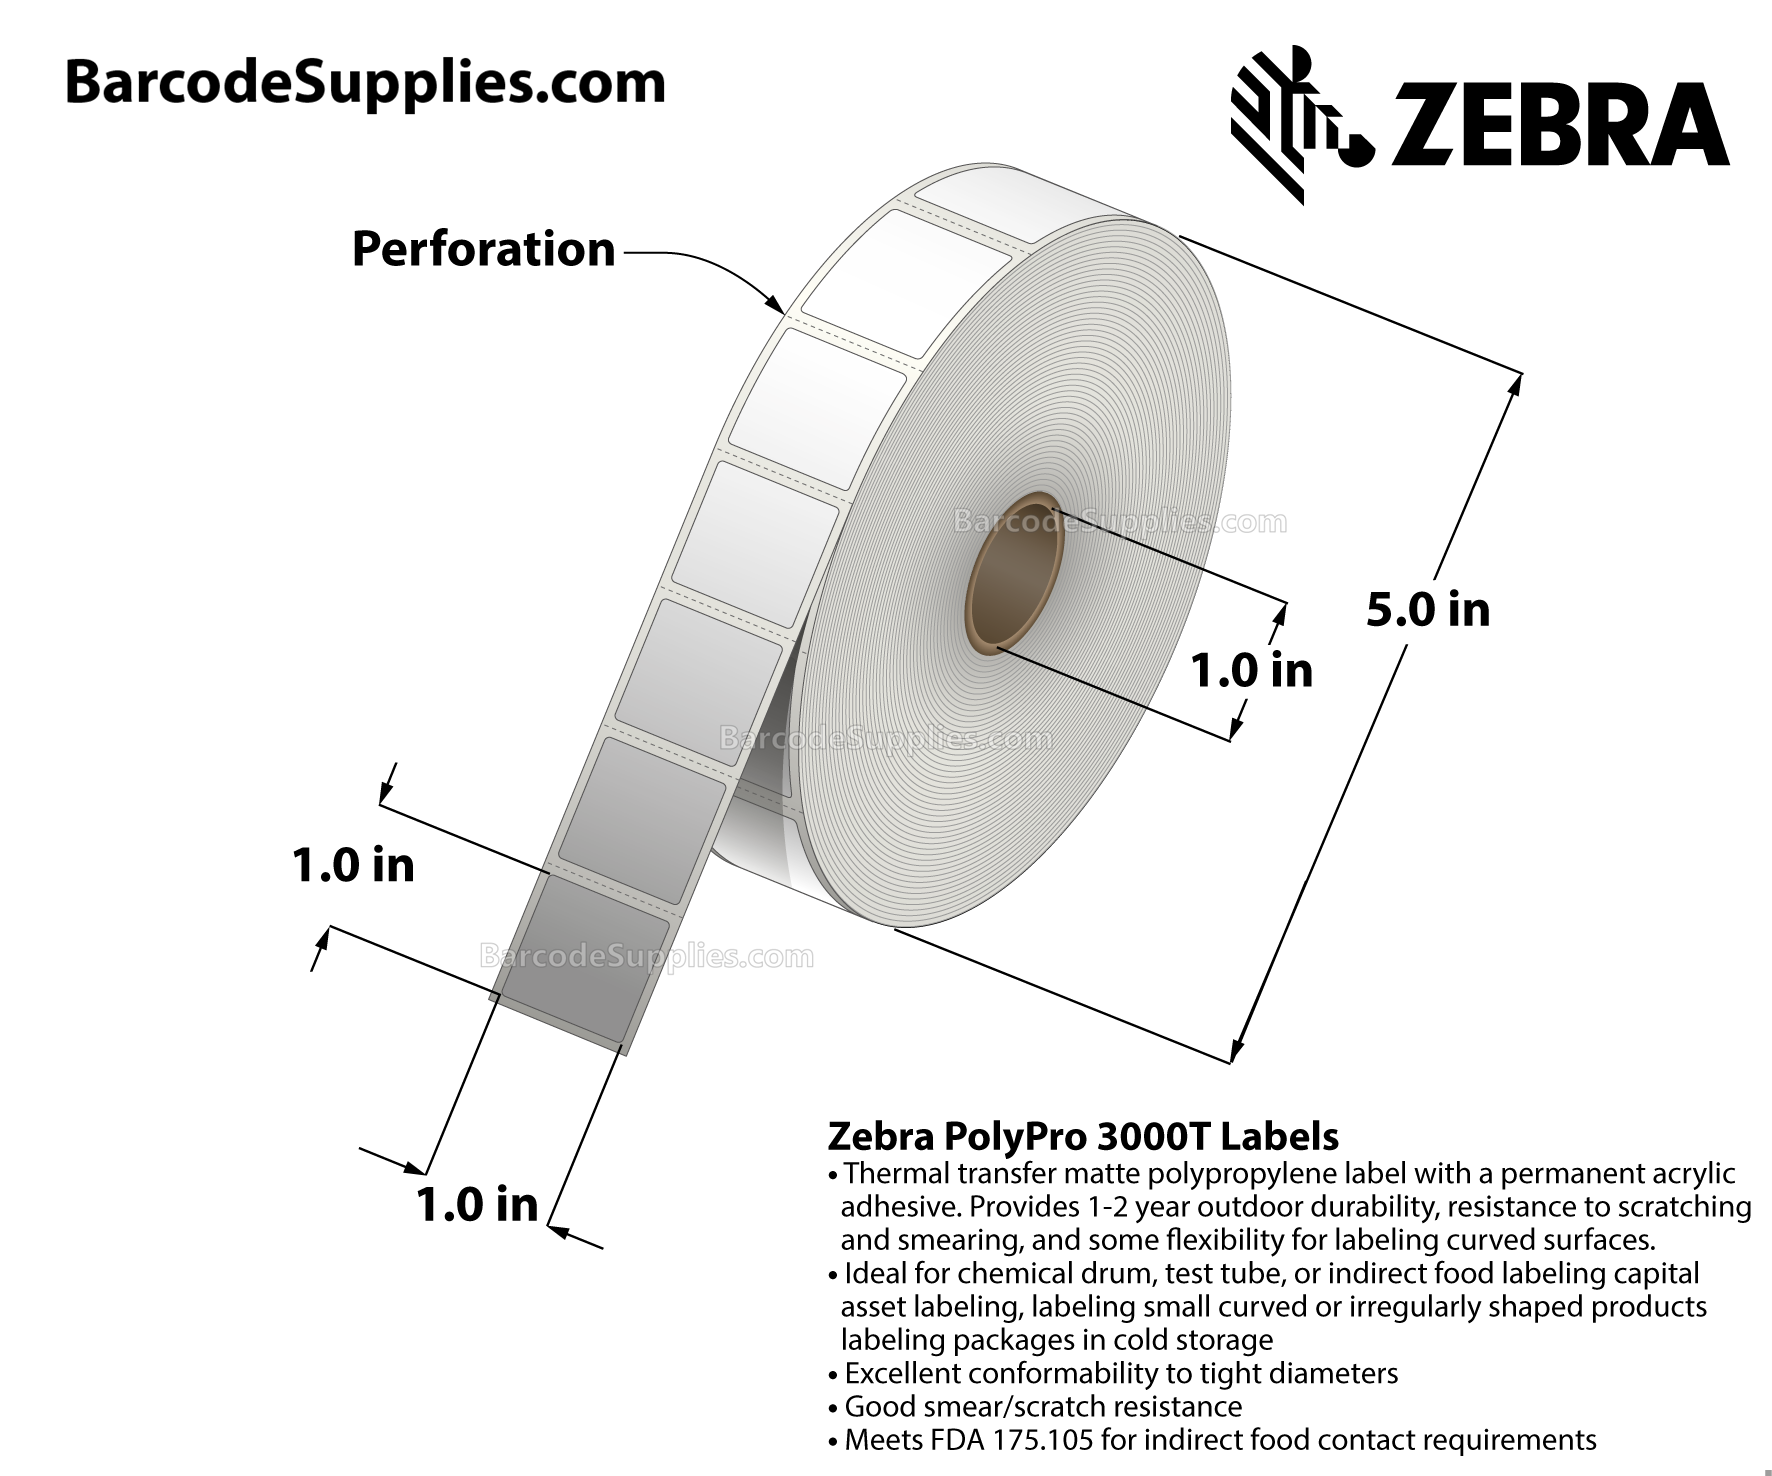 1 x 1 Thermal Transfer White PolyPro 3000T Labels With Permanent Adhesive - Perforated - 2000 Labels Per Roll - Carton Of 1 Rolls - 2000 Labels Total - MPN: 10023328